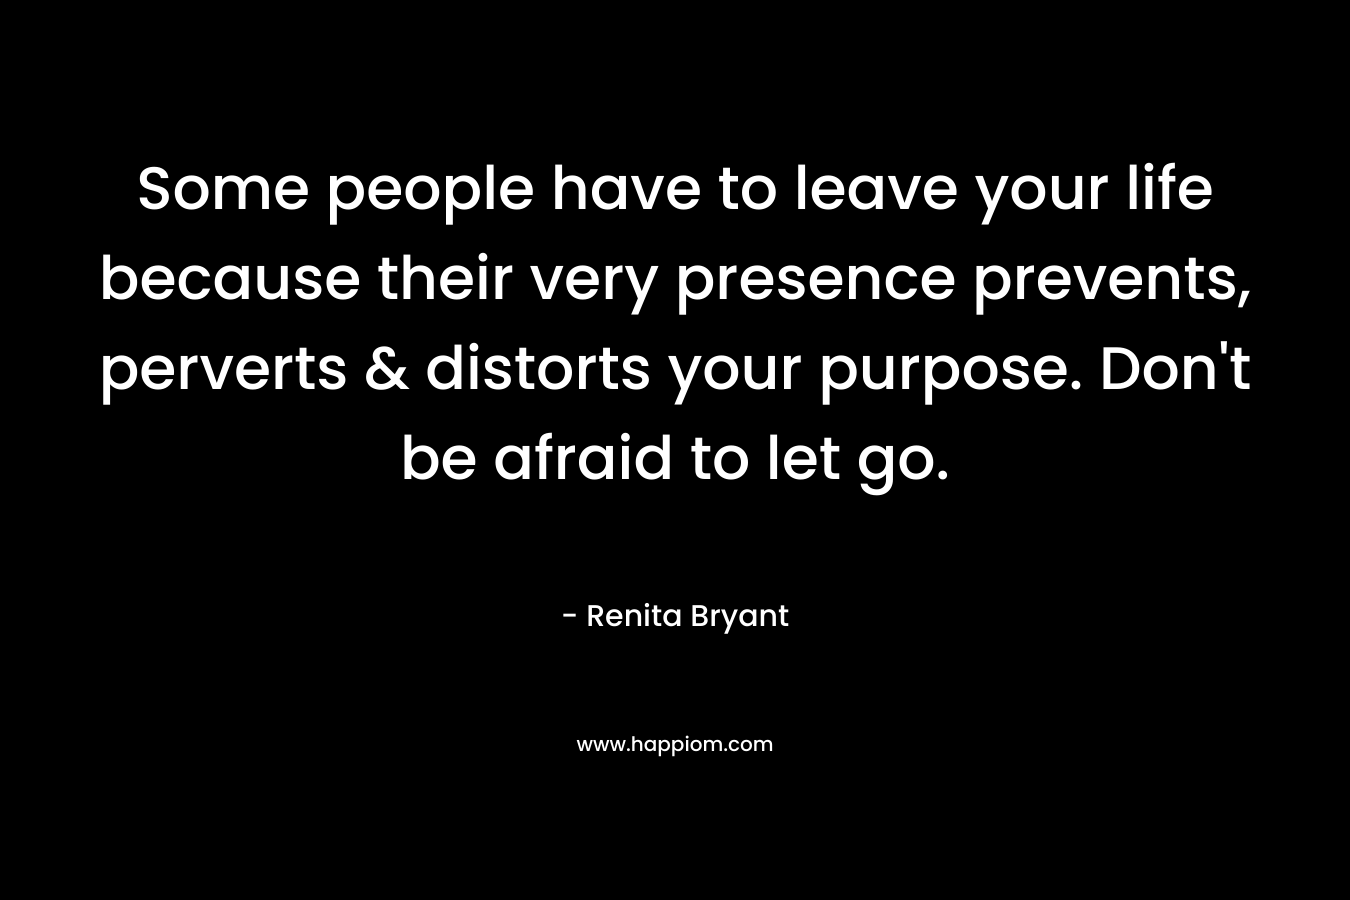 Some people have to leave your life because their very presence prevents, perverts & distorts your purpose. Don’t be afraid to let go. – Renita Bryant